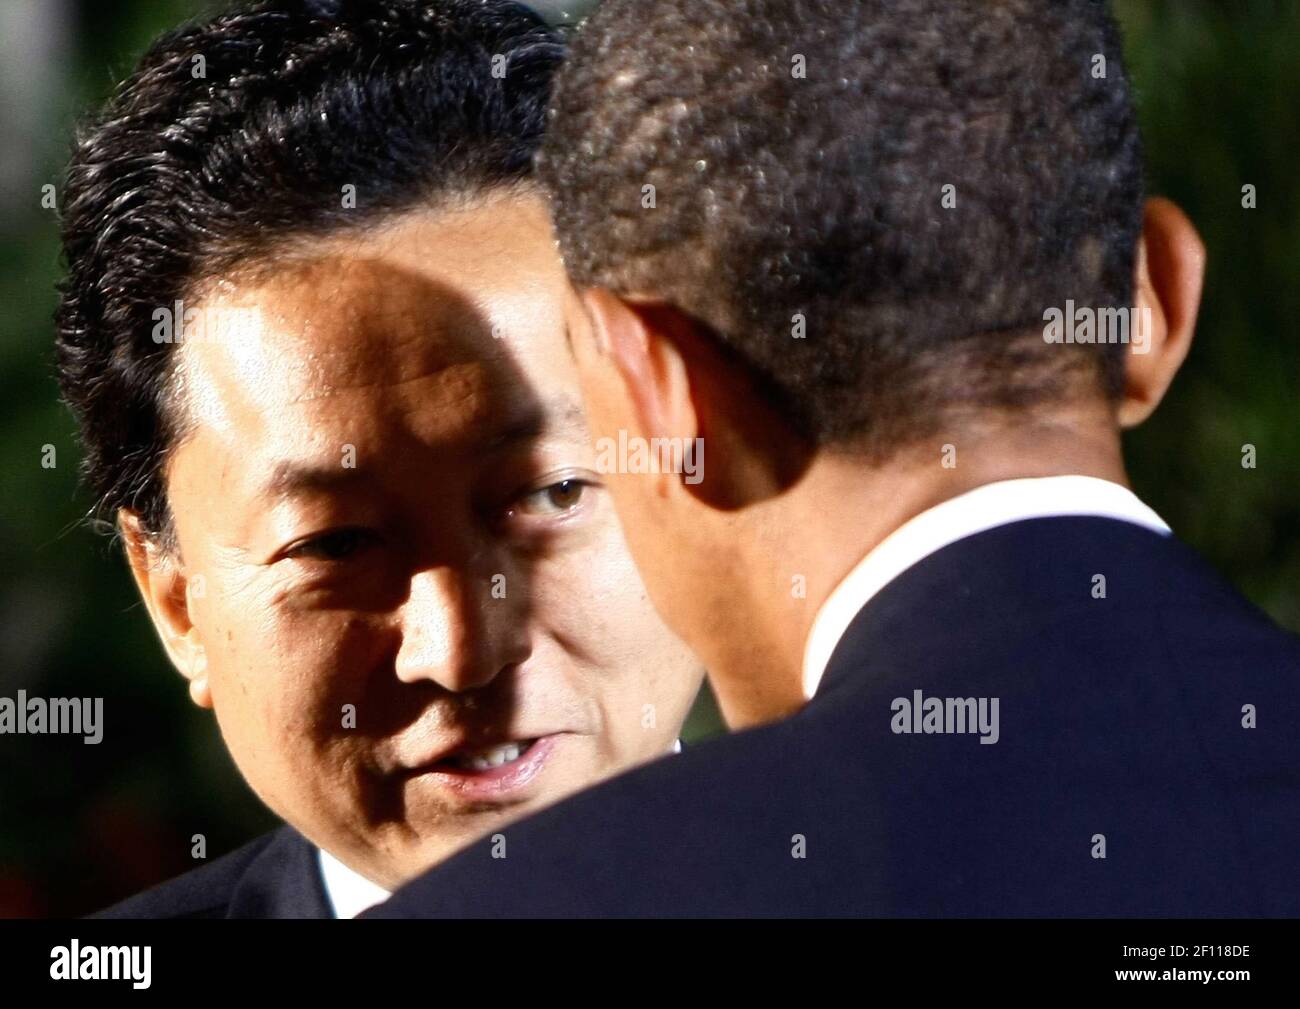 24 September 2009 - Pittsburgh, Pennsylvania - U.S. President Barack Obama (R) escorts Japanese Prime Minister Yukio Hatoyama while welcoming him to the opening dinner for G-20 leaders at the Phipps Conservatory on September 24, 2009 in Pittsburgh, Pennsylvania. Heads of state from the world's leading economic powers arrived today for the two-day G-20 summit held at the David L. Lawrence Convention Center aimed at promoting economic growth. Photo Credit: Win McNamee/Pool/Sipa Press/0909251418 Stock Photo